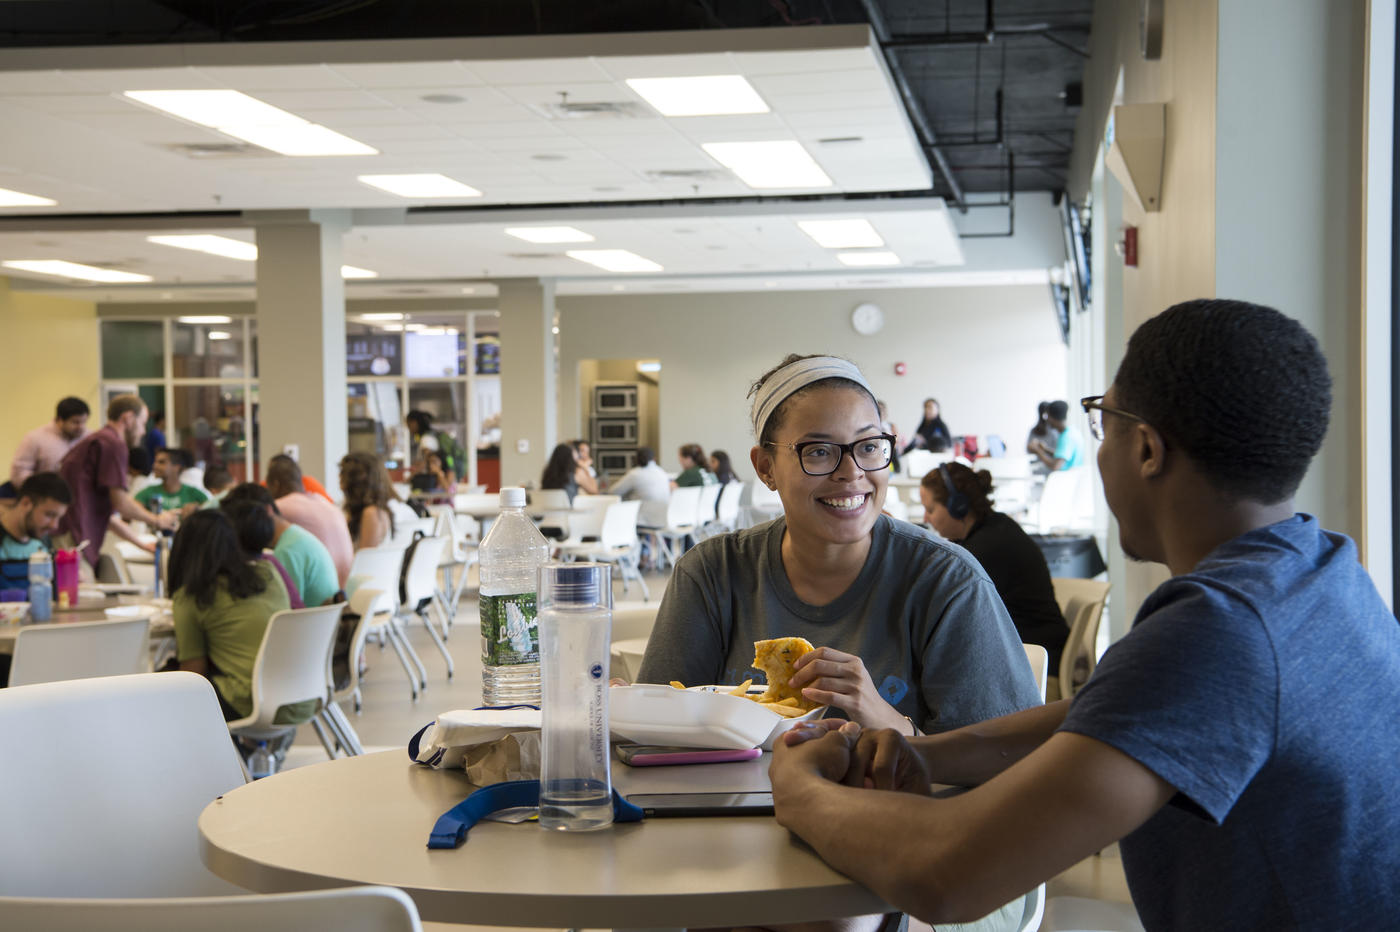 Students enjoying their time in the dining hall